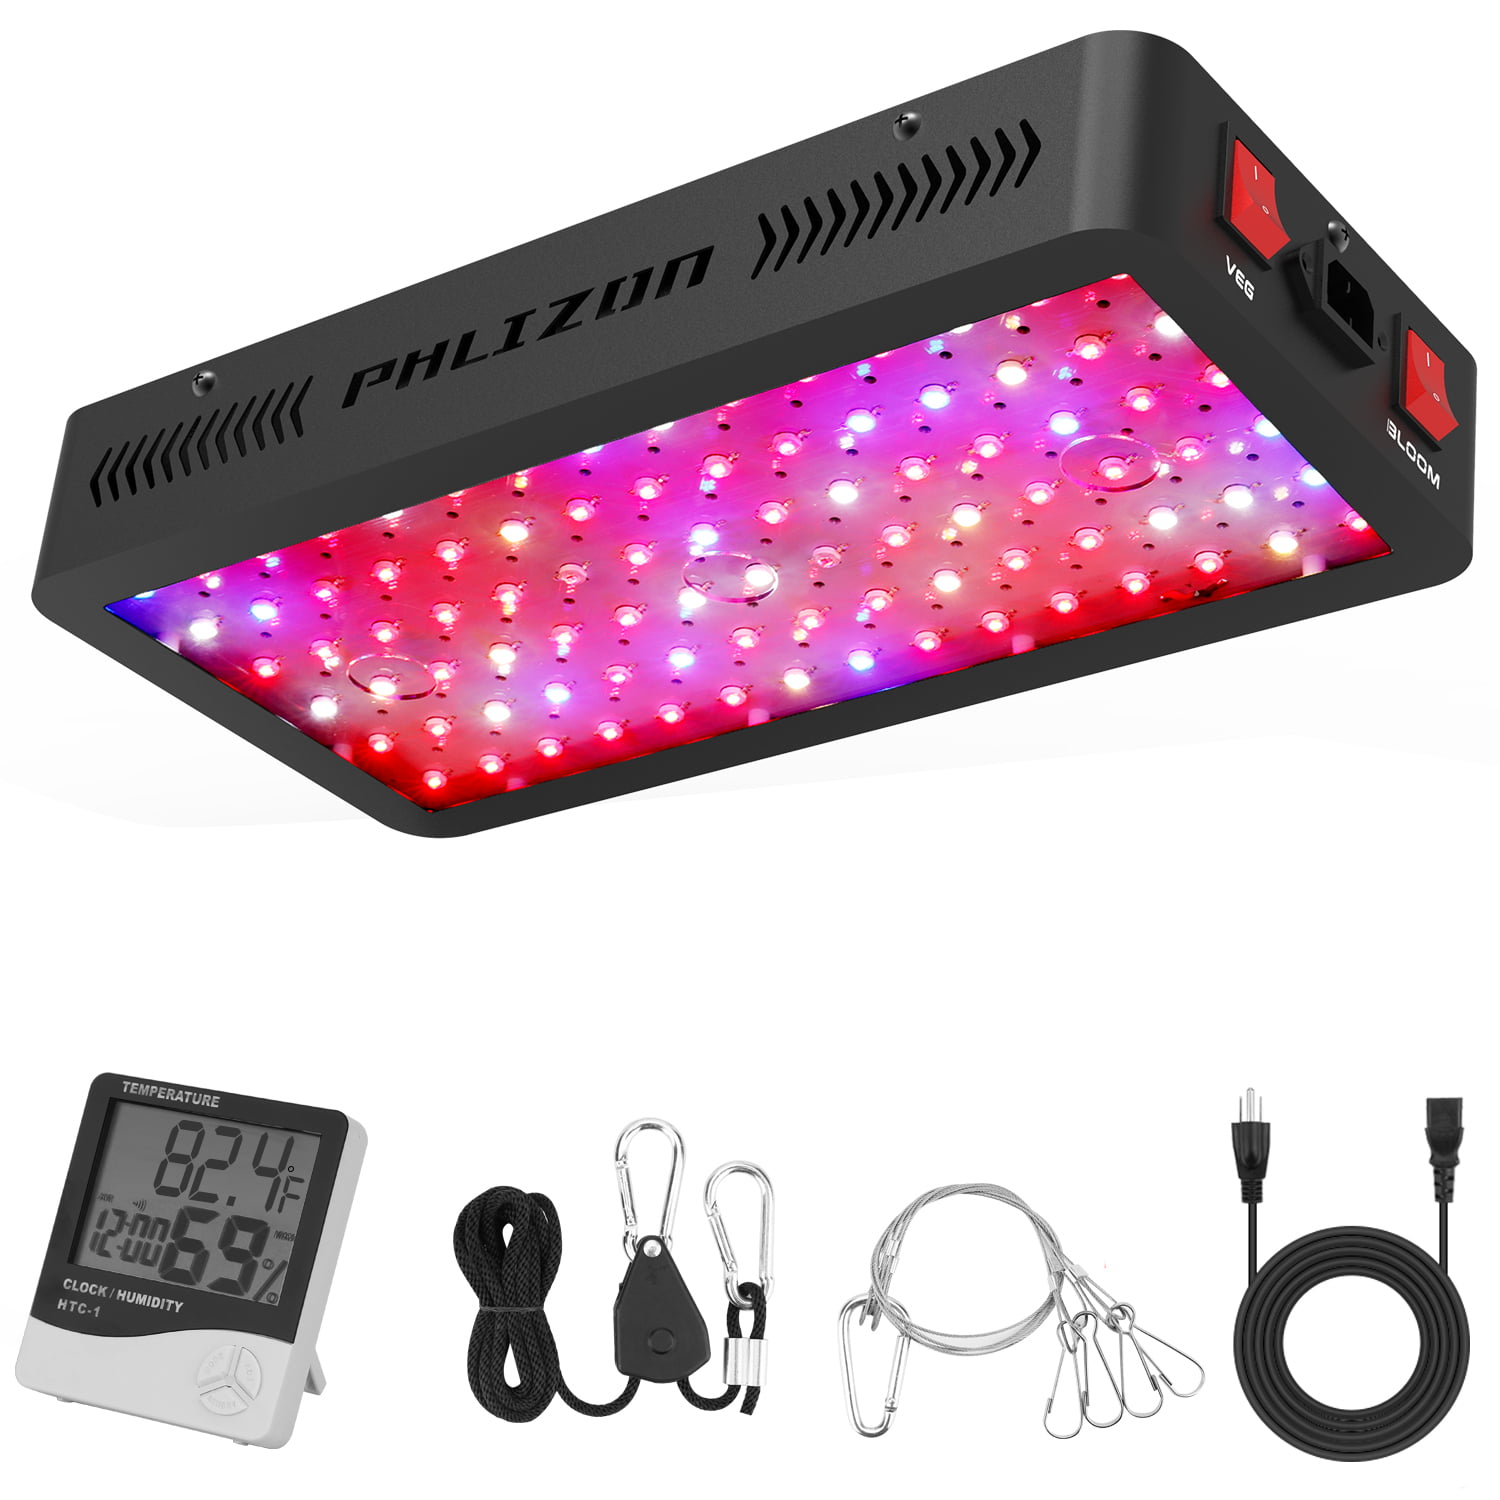 Details about   Hanging Type 36 LED Grow Light Full Spectrum Double Chips Hydroponic Household 